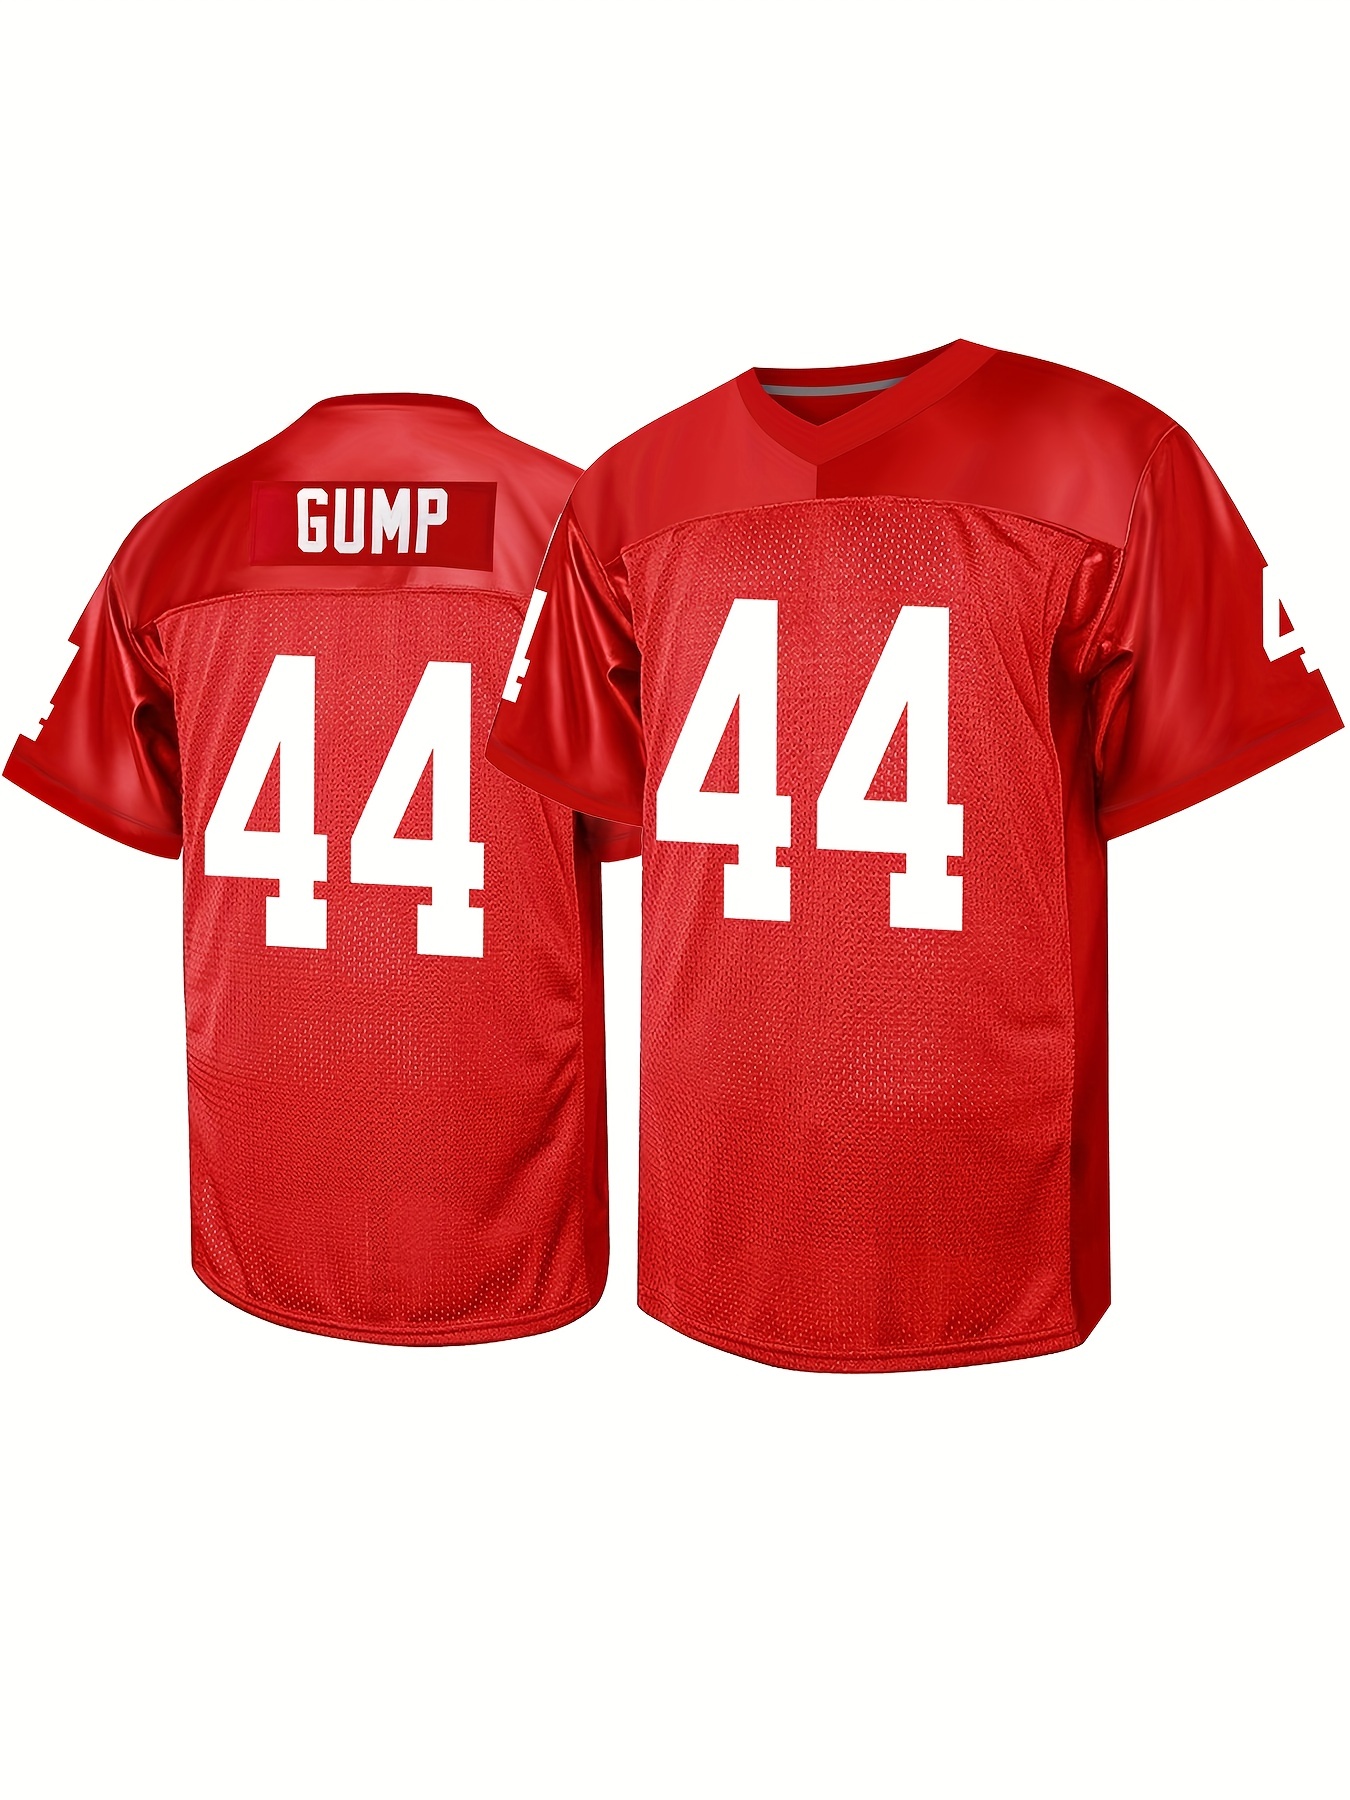 Temu Men's Embroidery Rugby Jersey, #16 Red Retro Classics Design Breathable Short Sleeve American Football, Soccer Pullover for Training Competition